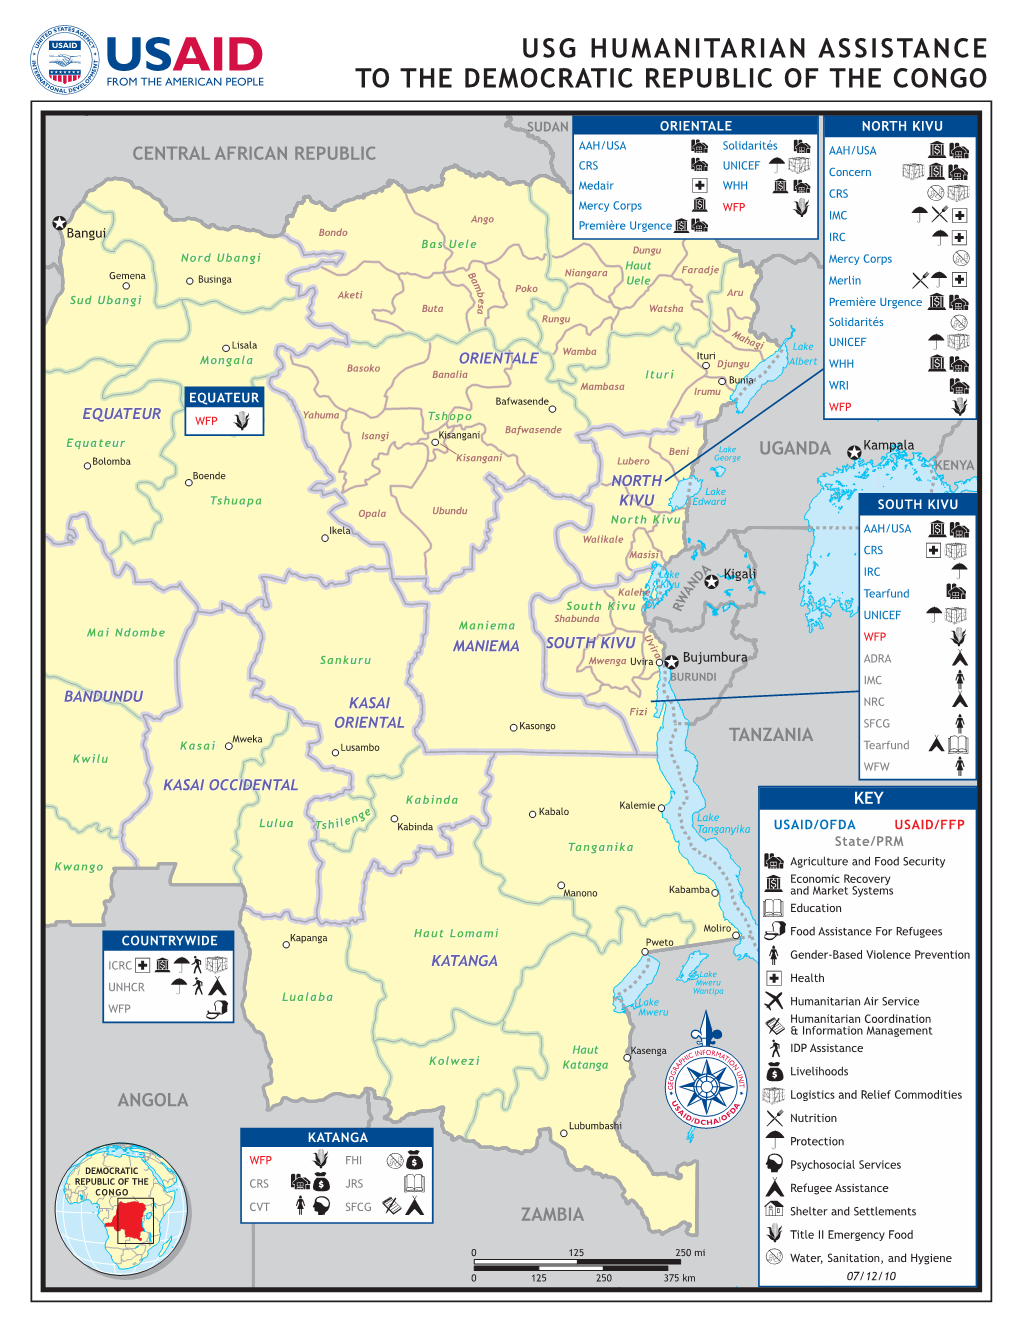 Usg Humanitarian Assistance to the Democratic Republic of the Congo